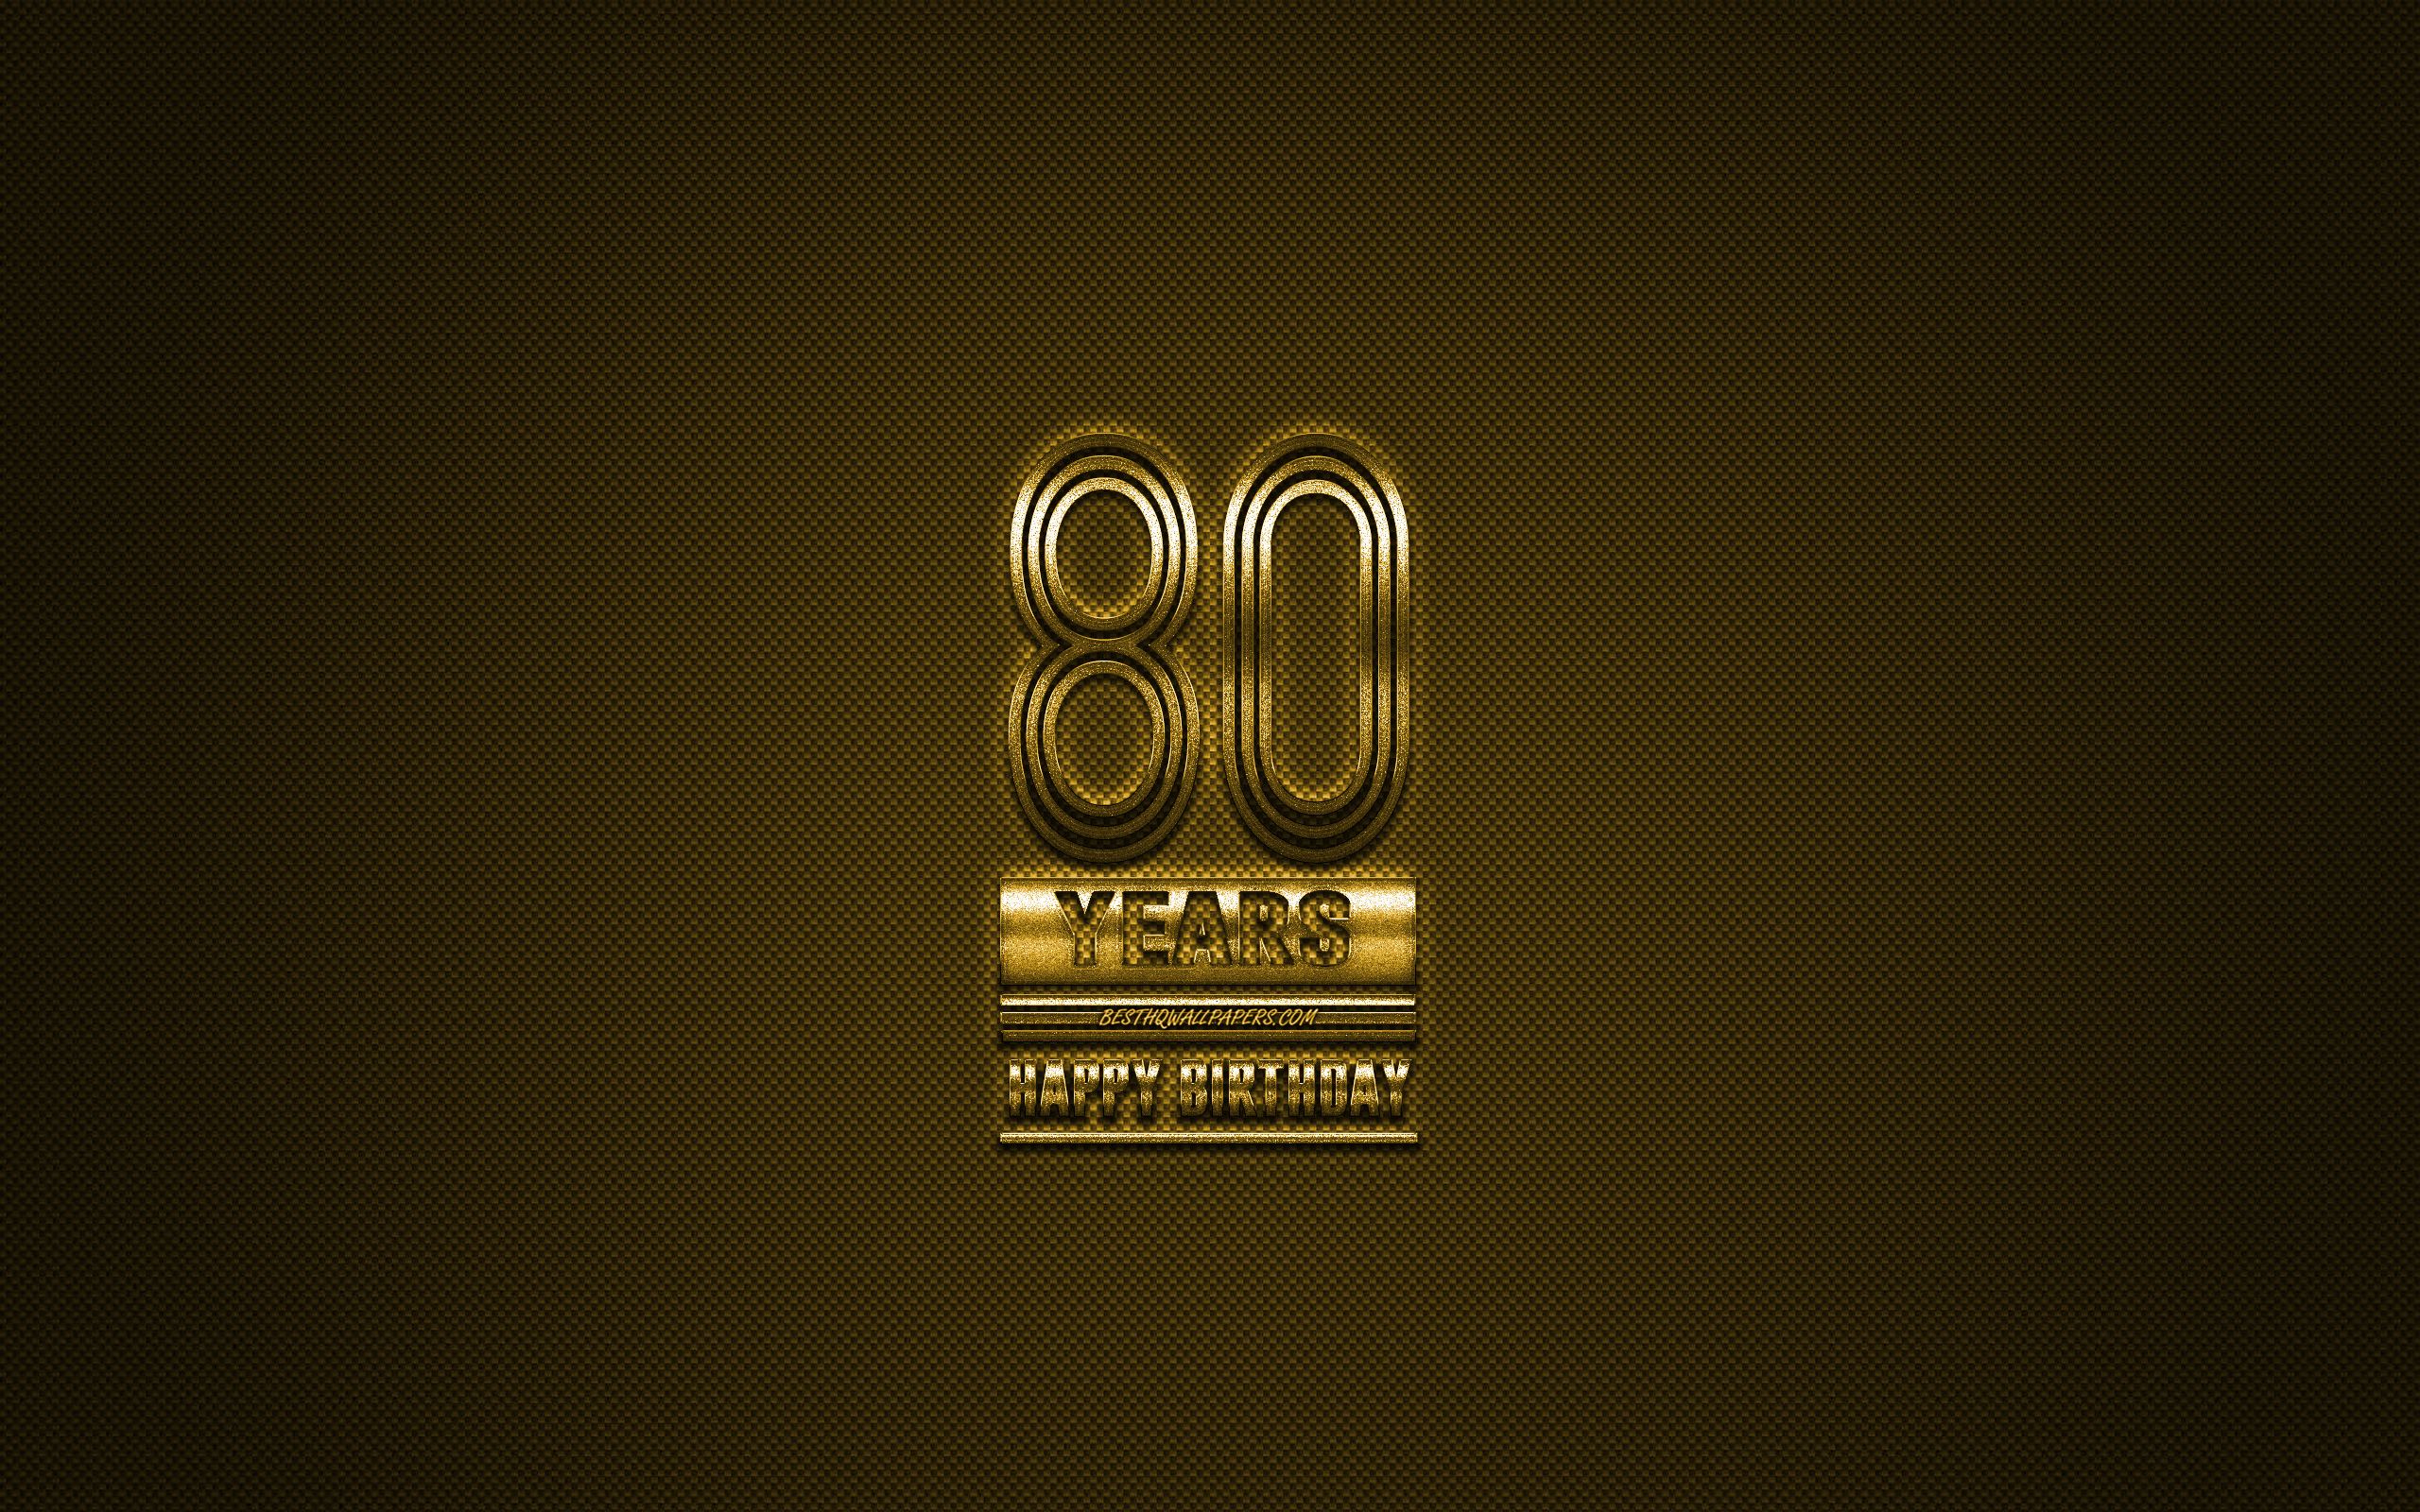 Download wallpaper 80th Happy Birthday, Golden letters, Golden Birthday background, 80 Years Birthday, Happy 80th Birthday, golden carbon background, Happy Birthday, greeting card, Happy 80 Years Birthday for desktop with resolution 2560x1600